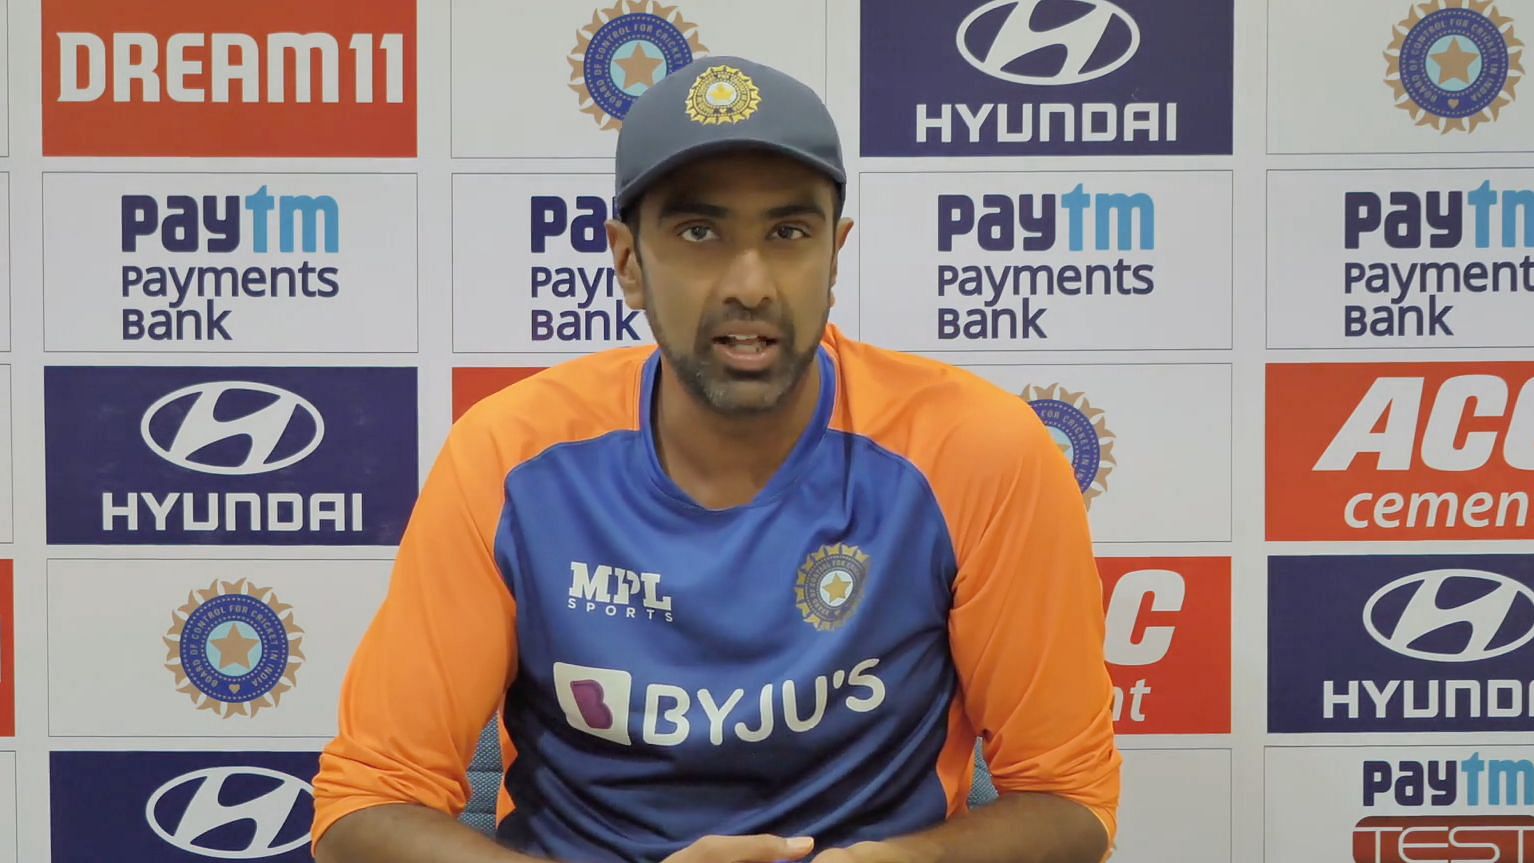 ‘Rishabh Pant was always going to be a good cricketer,’ said R Ashwin after India won the second Test vs England at Chennai.